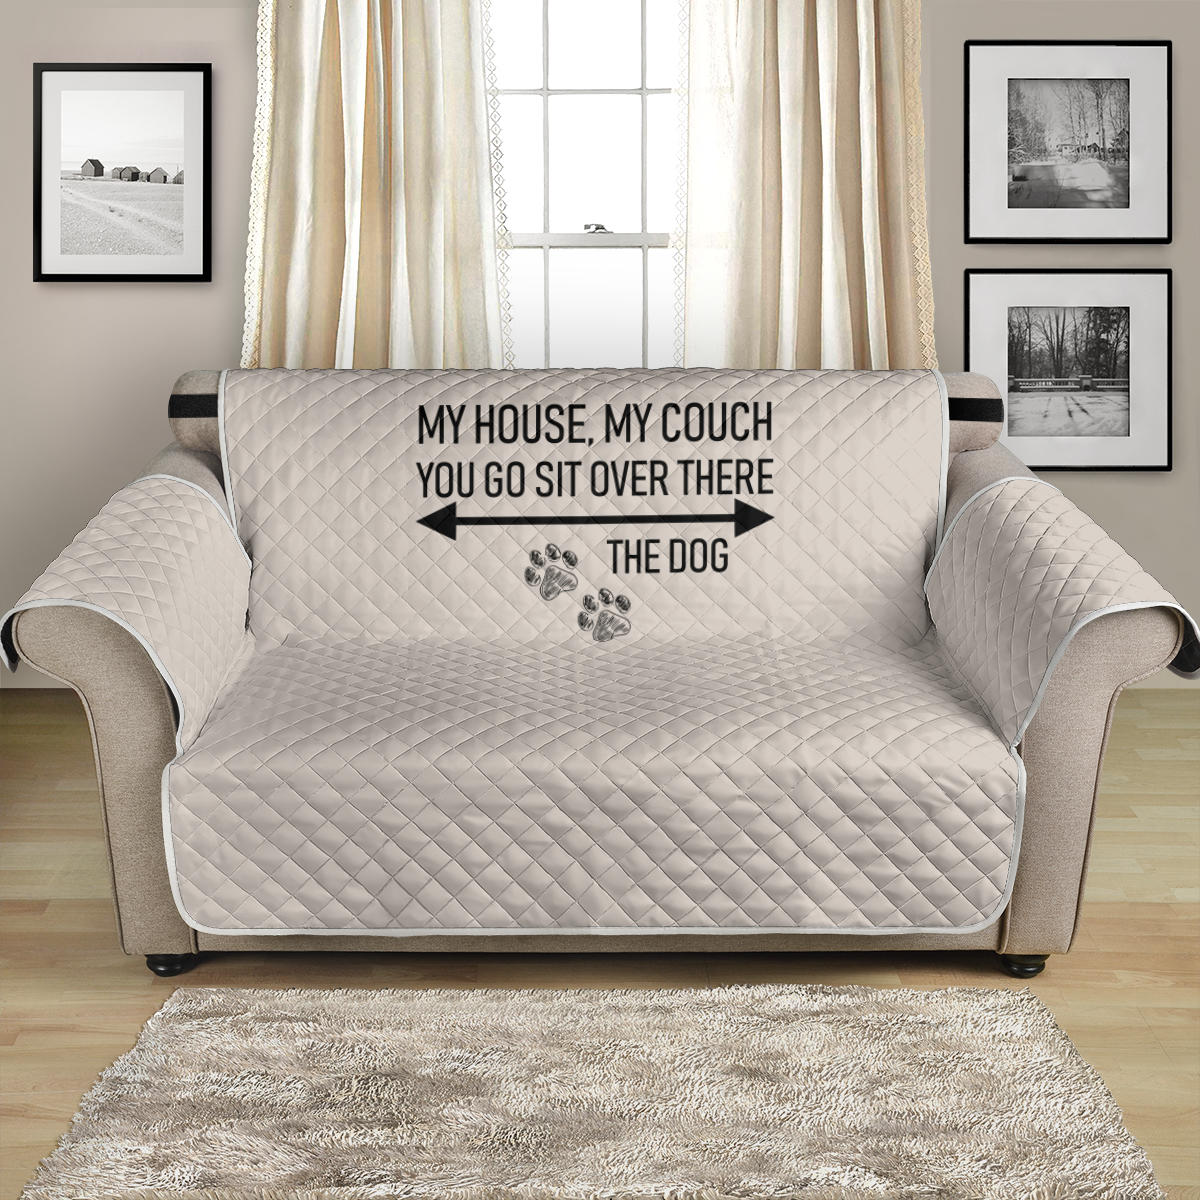 Furniture Protector - Love Seat - My House, My Couch